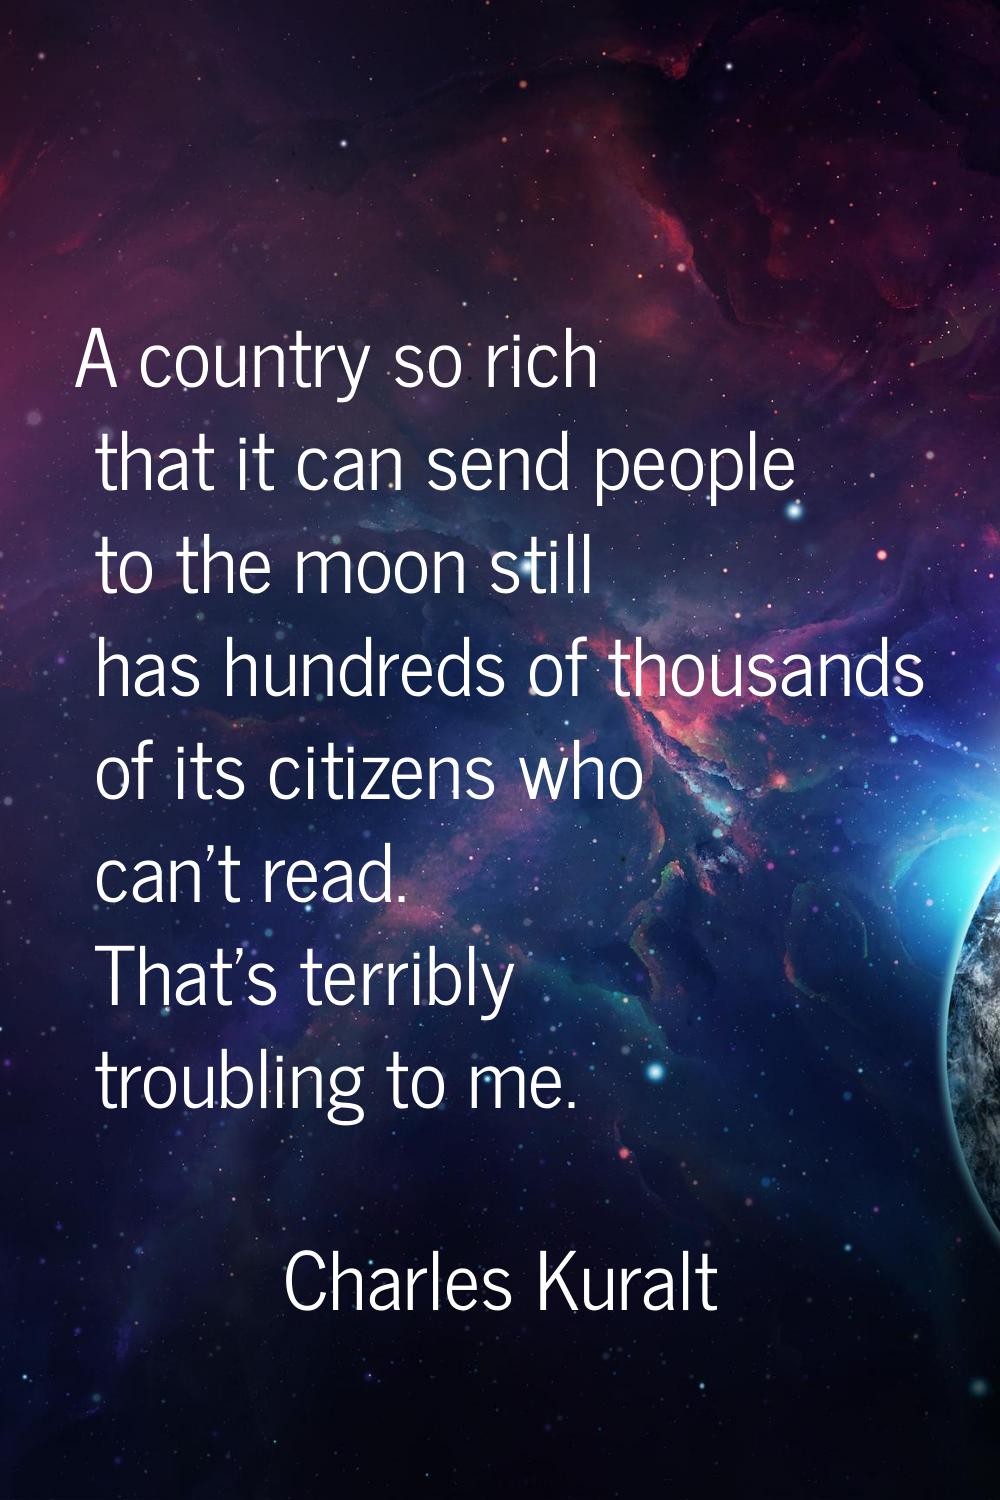 A country so rich that it can send people to the moon still has hundreds of thousands of its citize